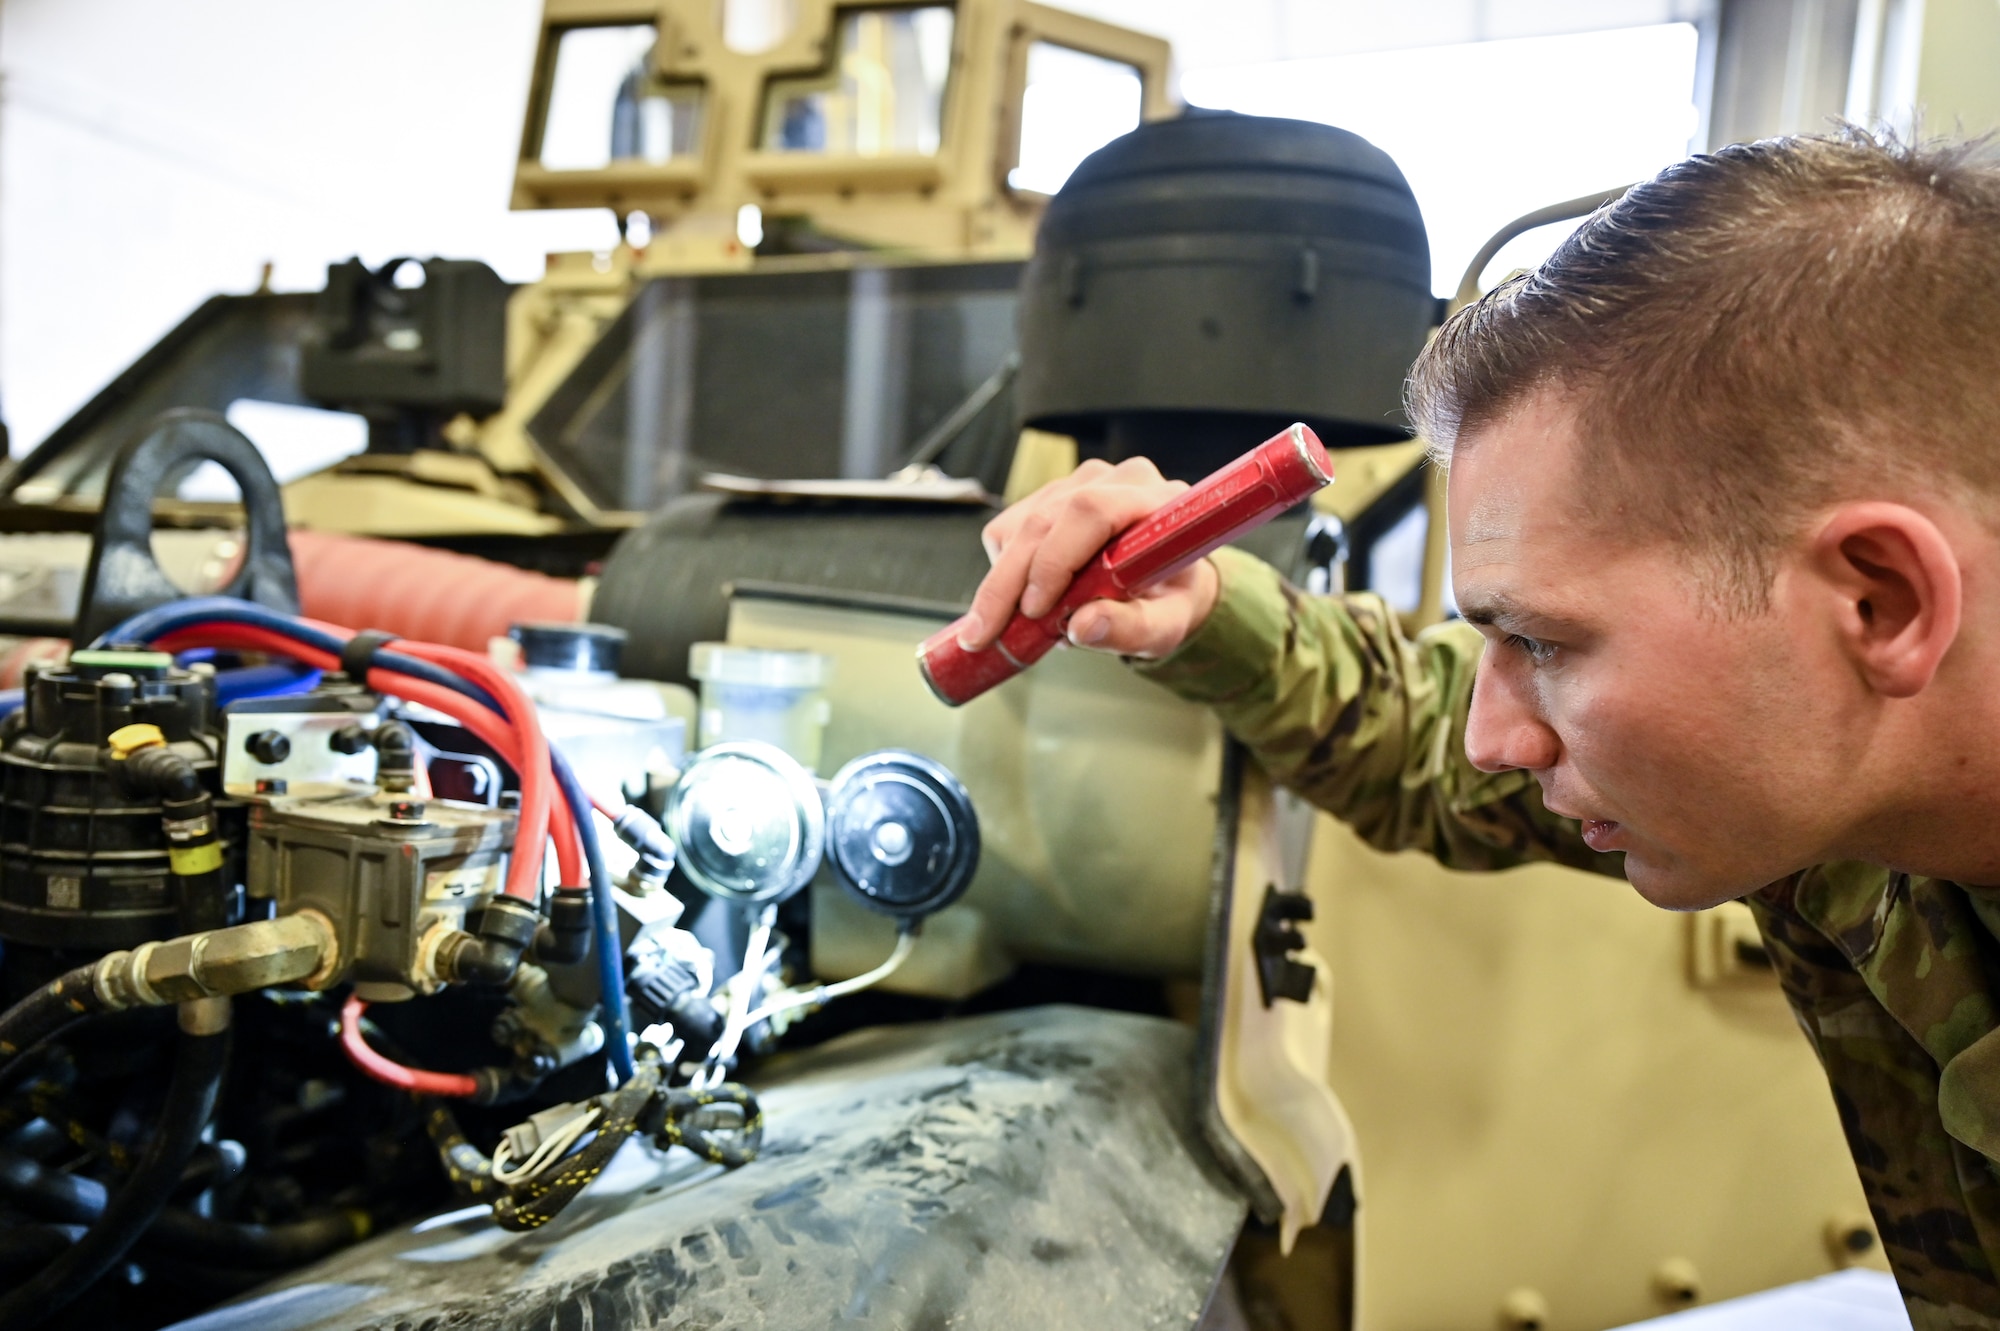 Senior Airman Korey Sarantopoulos, 90th Logistics Readiness Squadron vehicle maintenance journeyman, checks the electrical, brake, fuel, cooling and other systems for serviceability as part of a Joint Light Tactical Vehicle limited technical inspection at F.E. Warren Air Force Base, Wyoming, Oct 25, 2022. The 90 LRS is tasked with preparing the next generation of security forces vehicles sent to protect the 90th Missile Wing's ICBM system as part of Air Force Global Strike Command’s priority to modernize. (U.S. Air Force photo by Joseph Coslett)